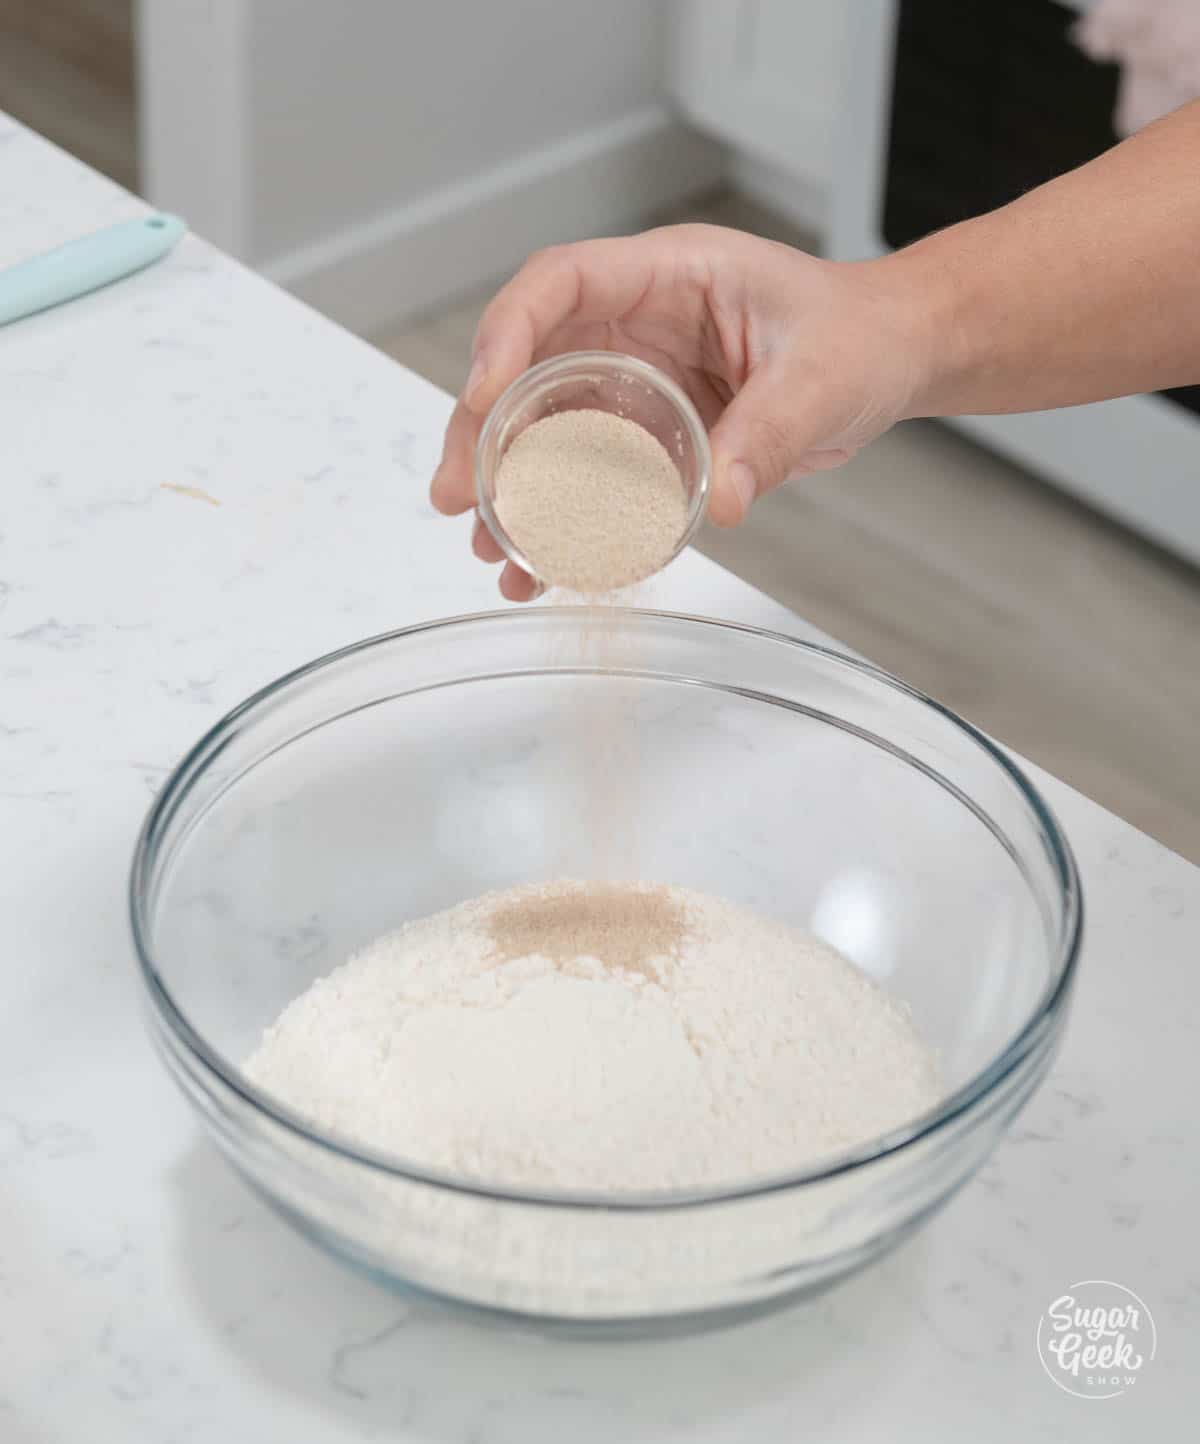 hand holding small bowl of yeast over a bowl of flour